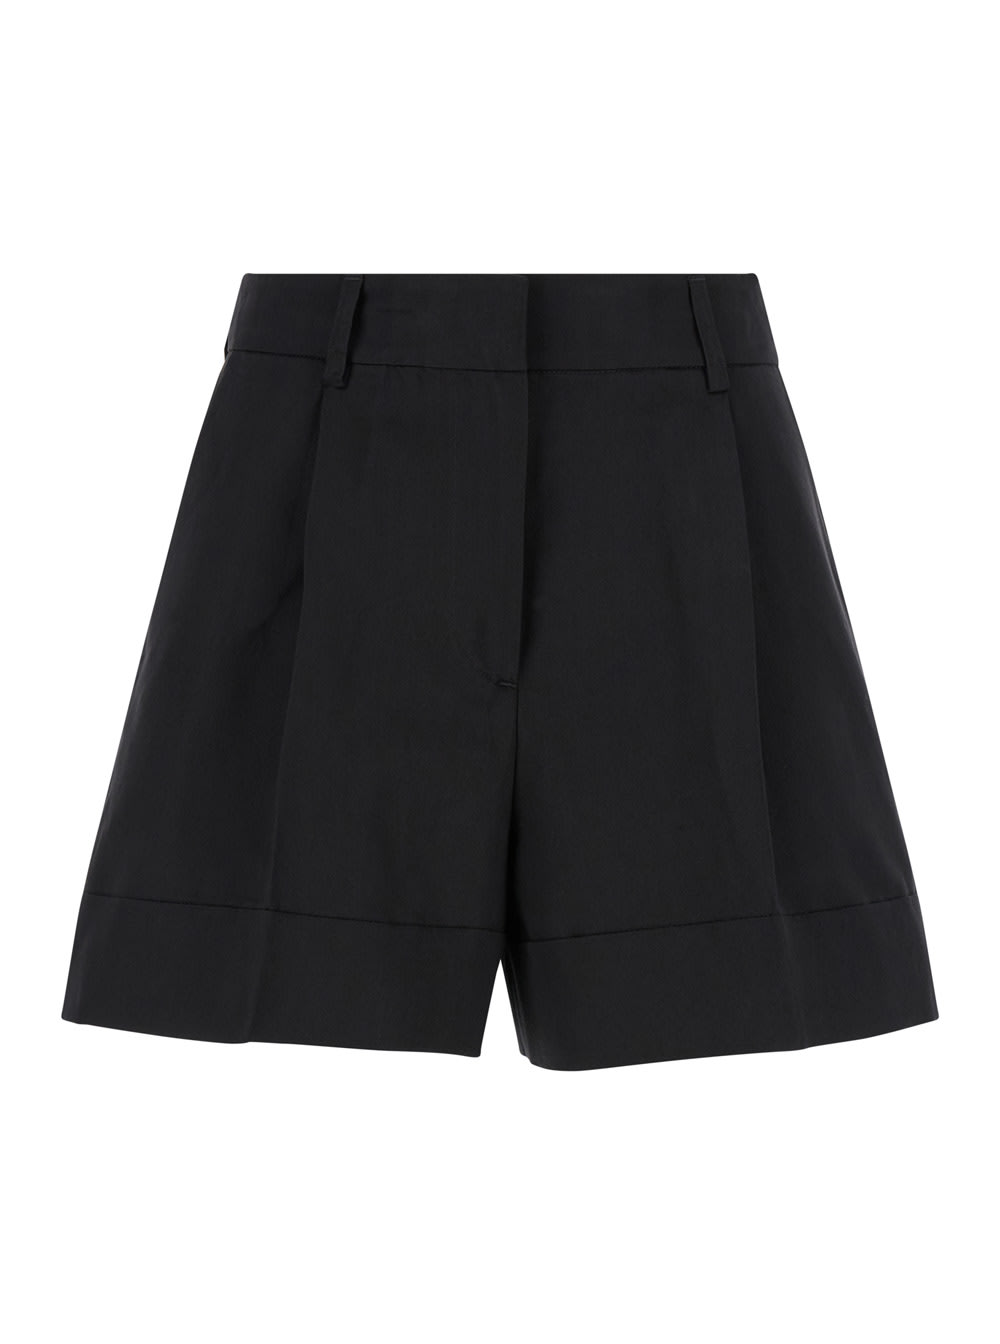 Black High Waisted delia Shorts In Cotton & Linen Blend Woman